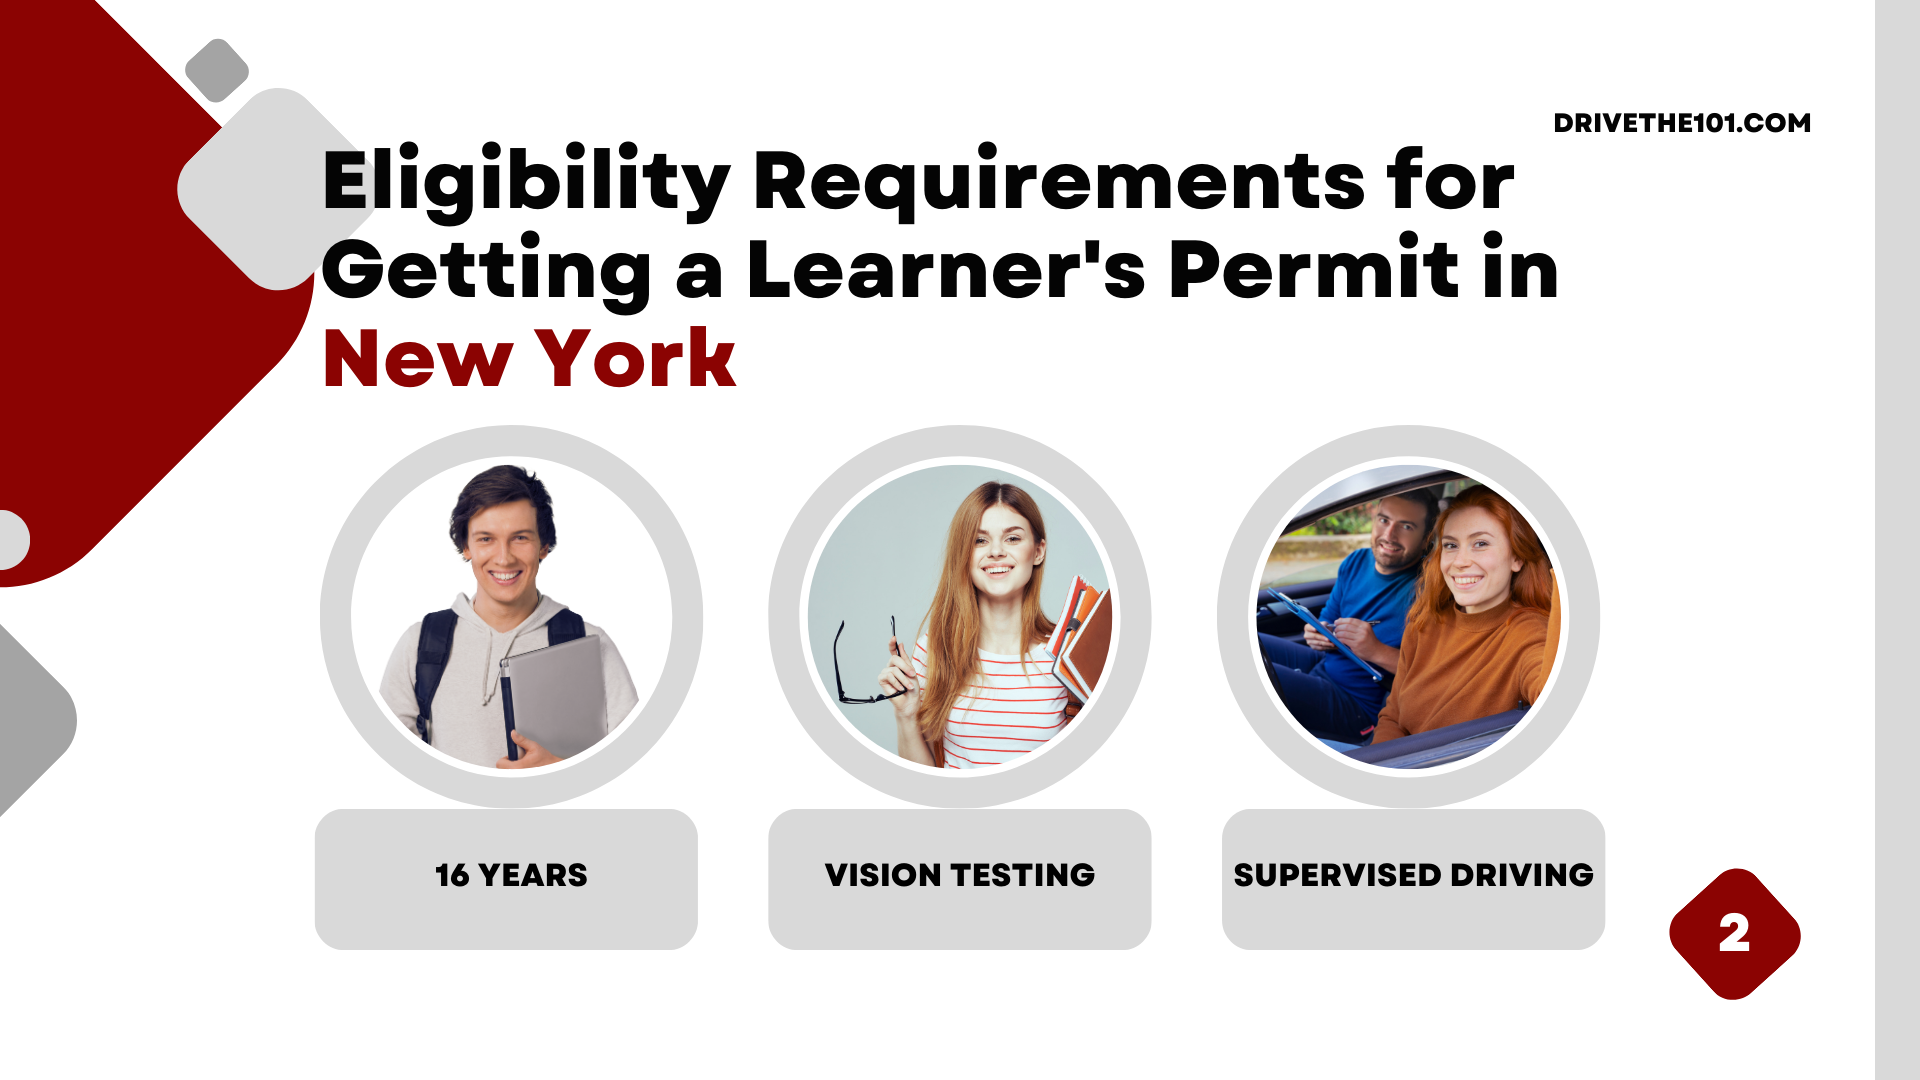 ny state learner permit office visit